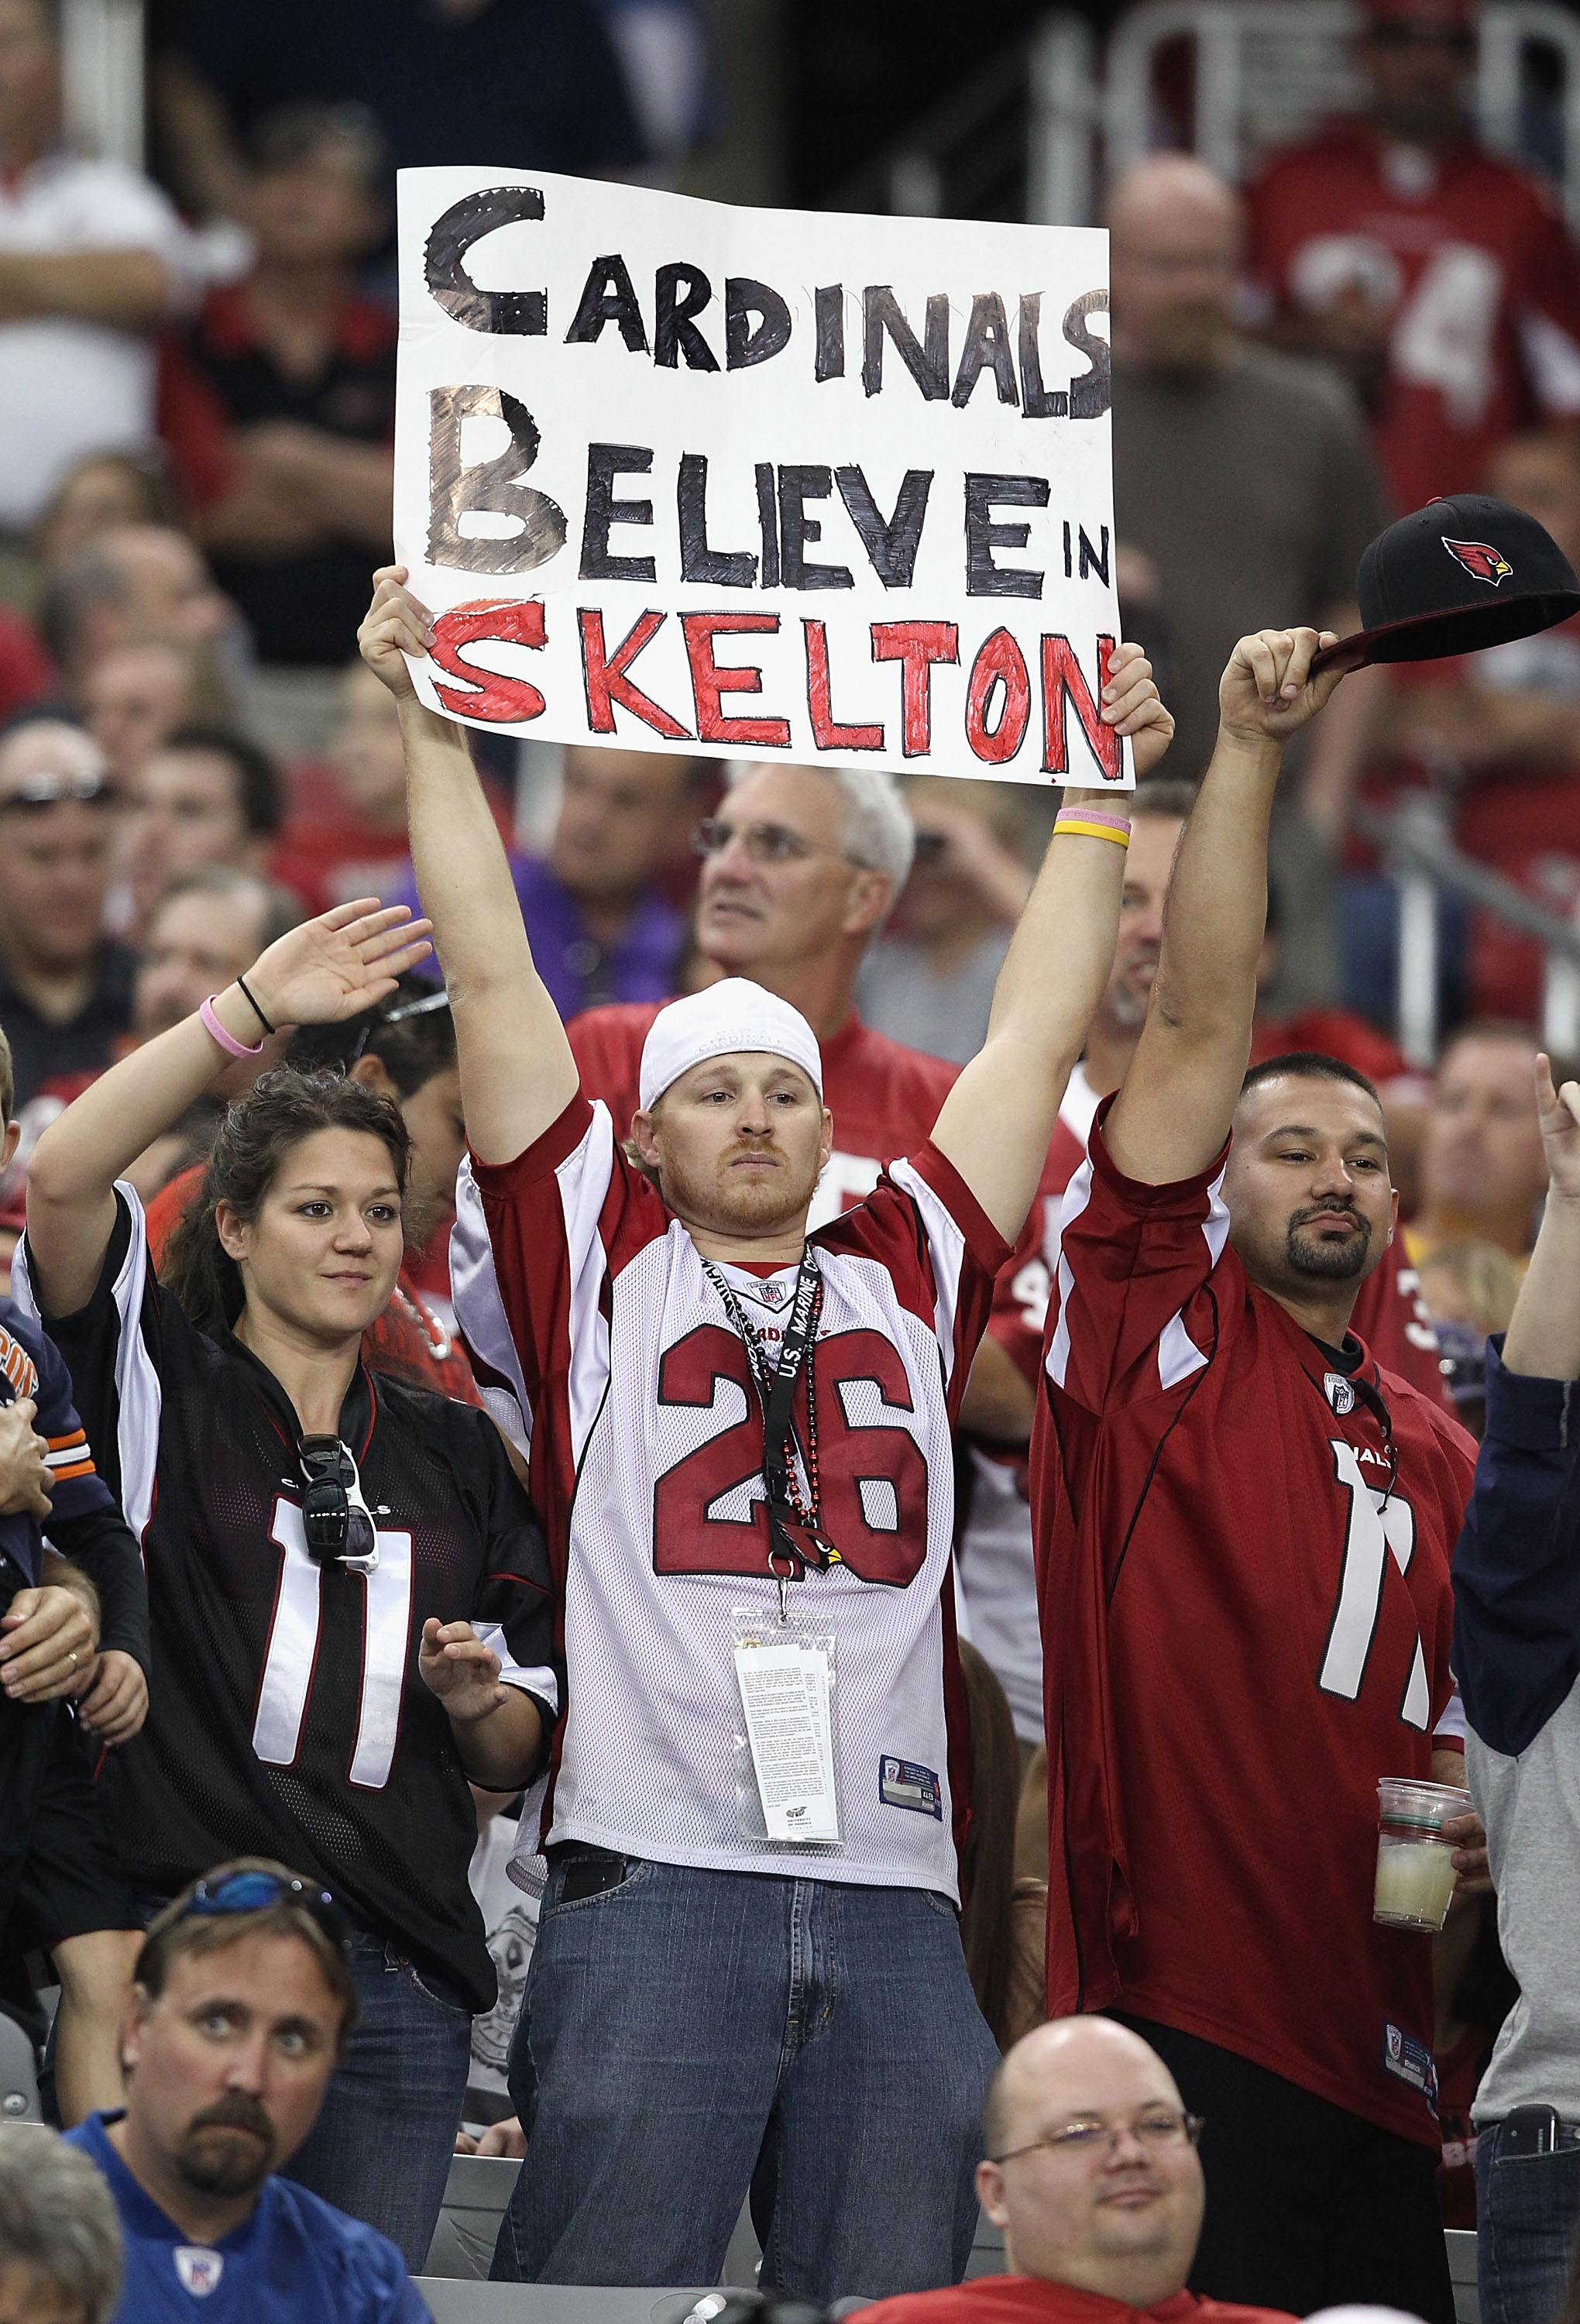 GLENDALE, AZ - DECEMBER 12:  A fan of the Arizona Cardinals holds up a sign for quarterback John Skelton #19 during the NFL game against the Denver Broncos at the University of Phoenix Stadium on December 12, 2010 in Glendale, Arizona.  The Cardinals defe